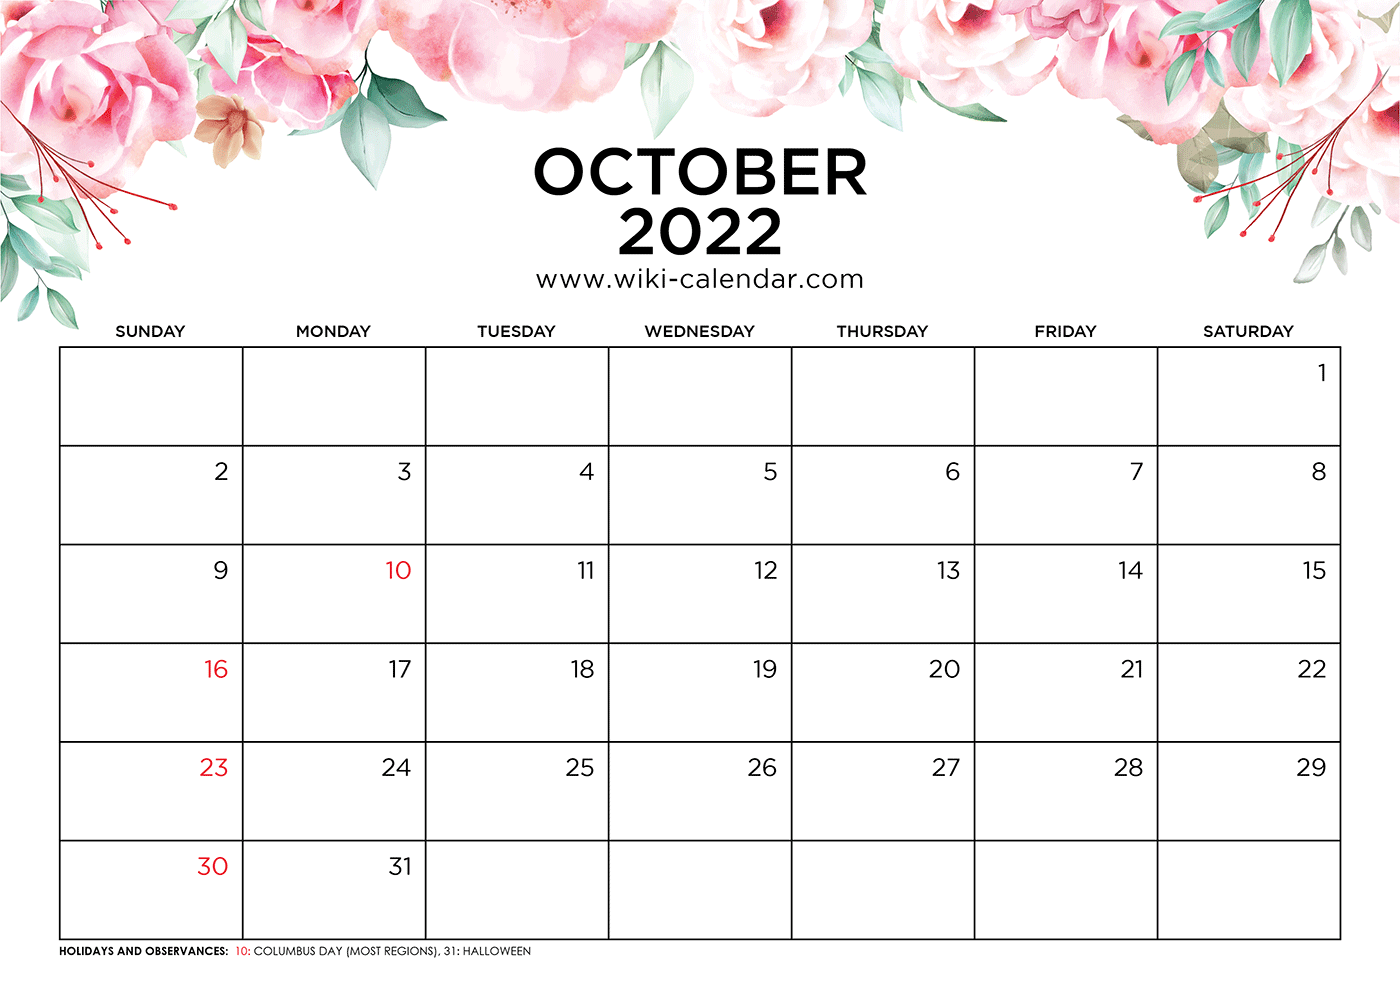 October 2022 Printable Calendar With Holidays Free Printable October 2022 Calendars - Wiki Calendar